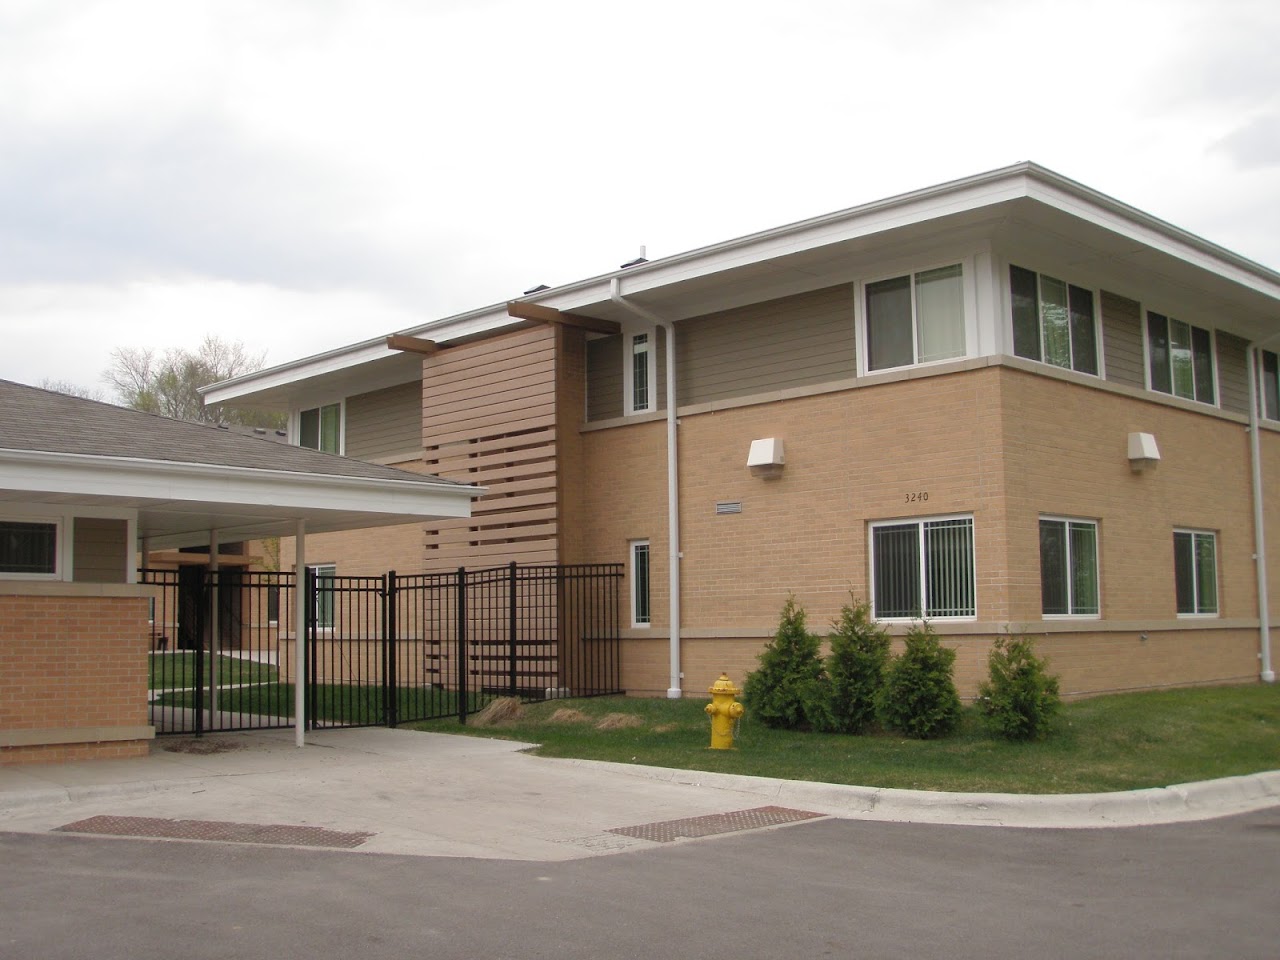 Photo of SANCTUARY APTS. Affordable housing located at 3300 W FOURTH ST SIOUX CITY, IA 51103